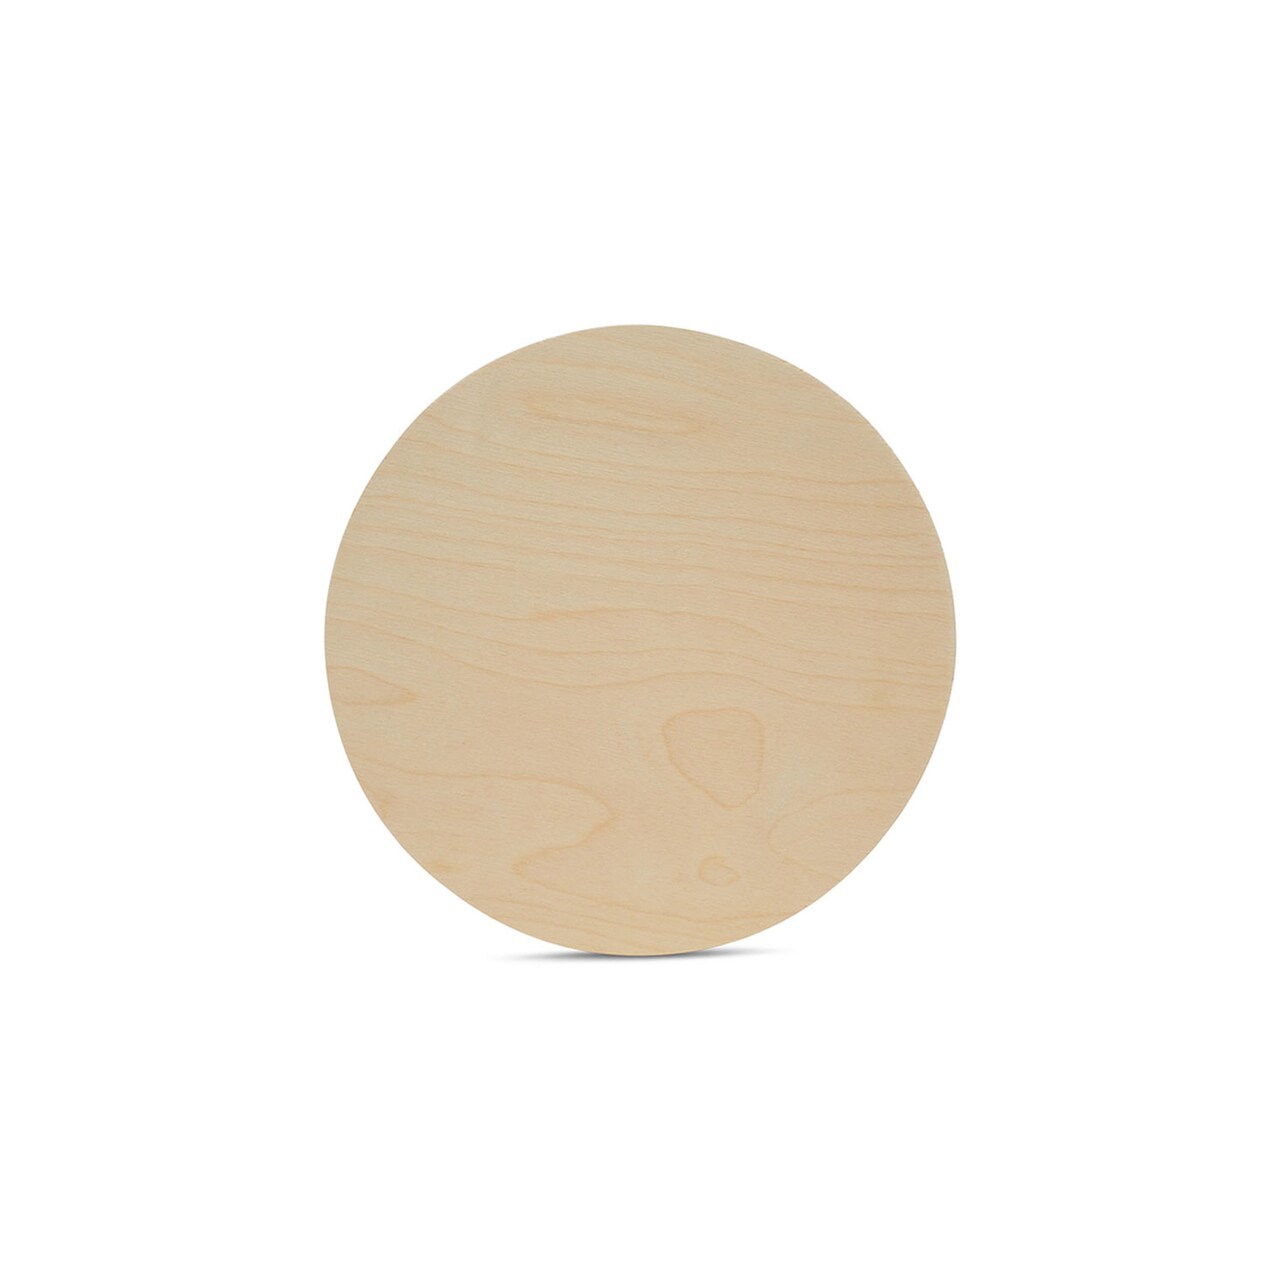 Wood Circles 12 inch, 3 Thicknesses, Unfinished Birch Sign Plaques